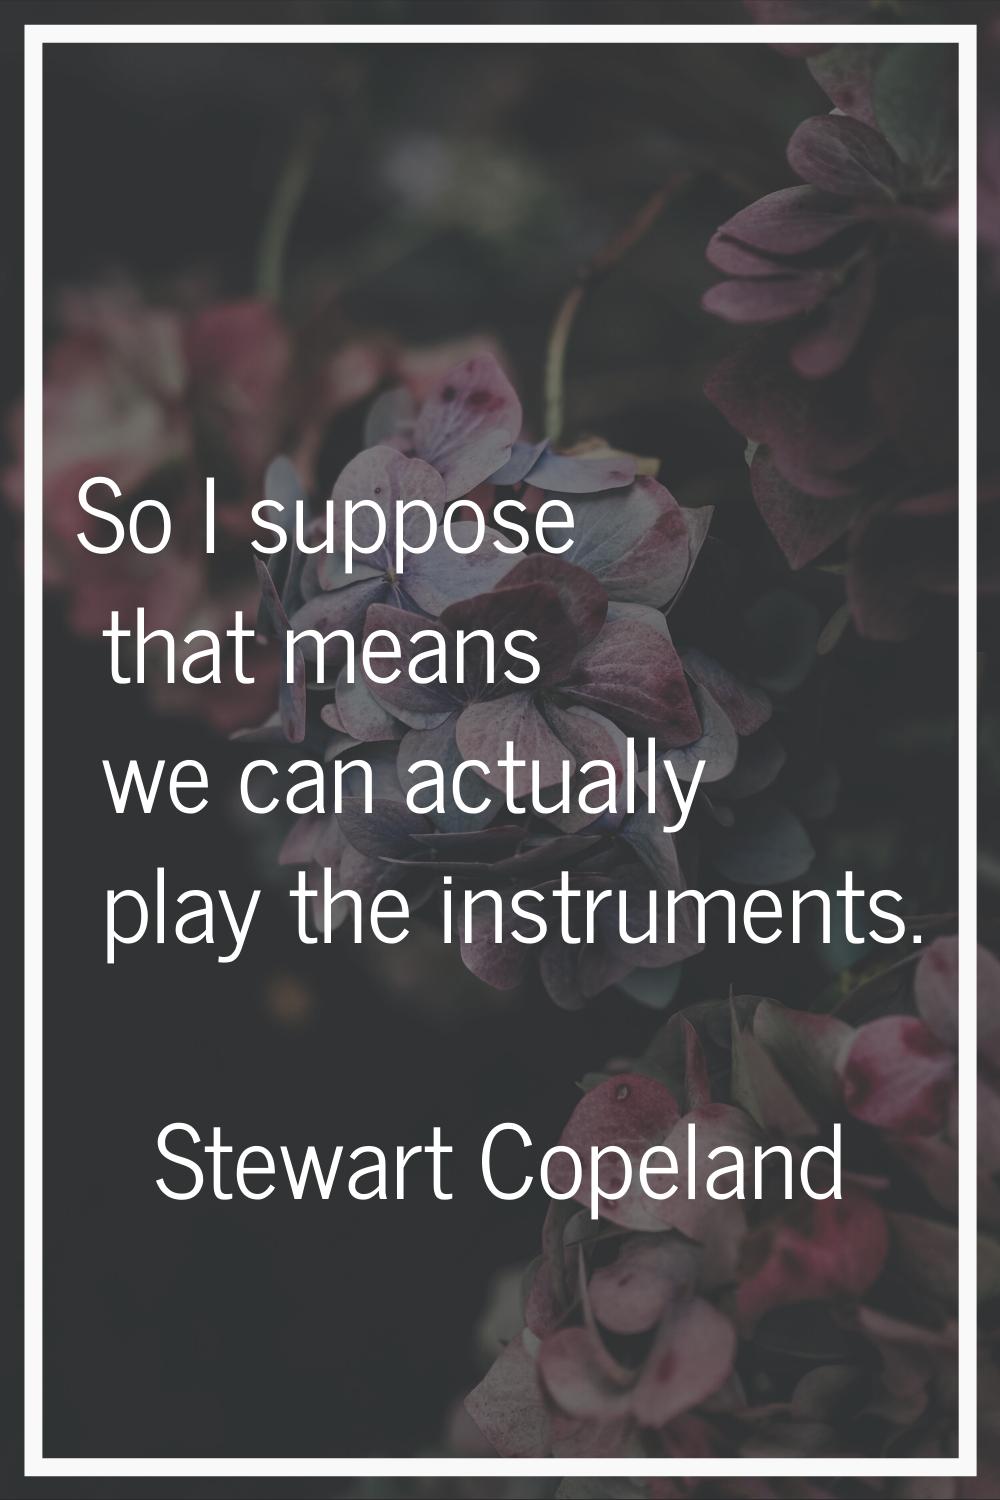 So I suppose that means we can actually play the instruments.